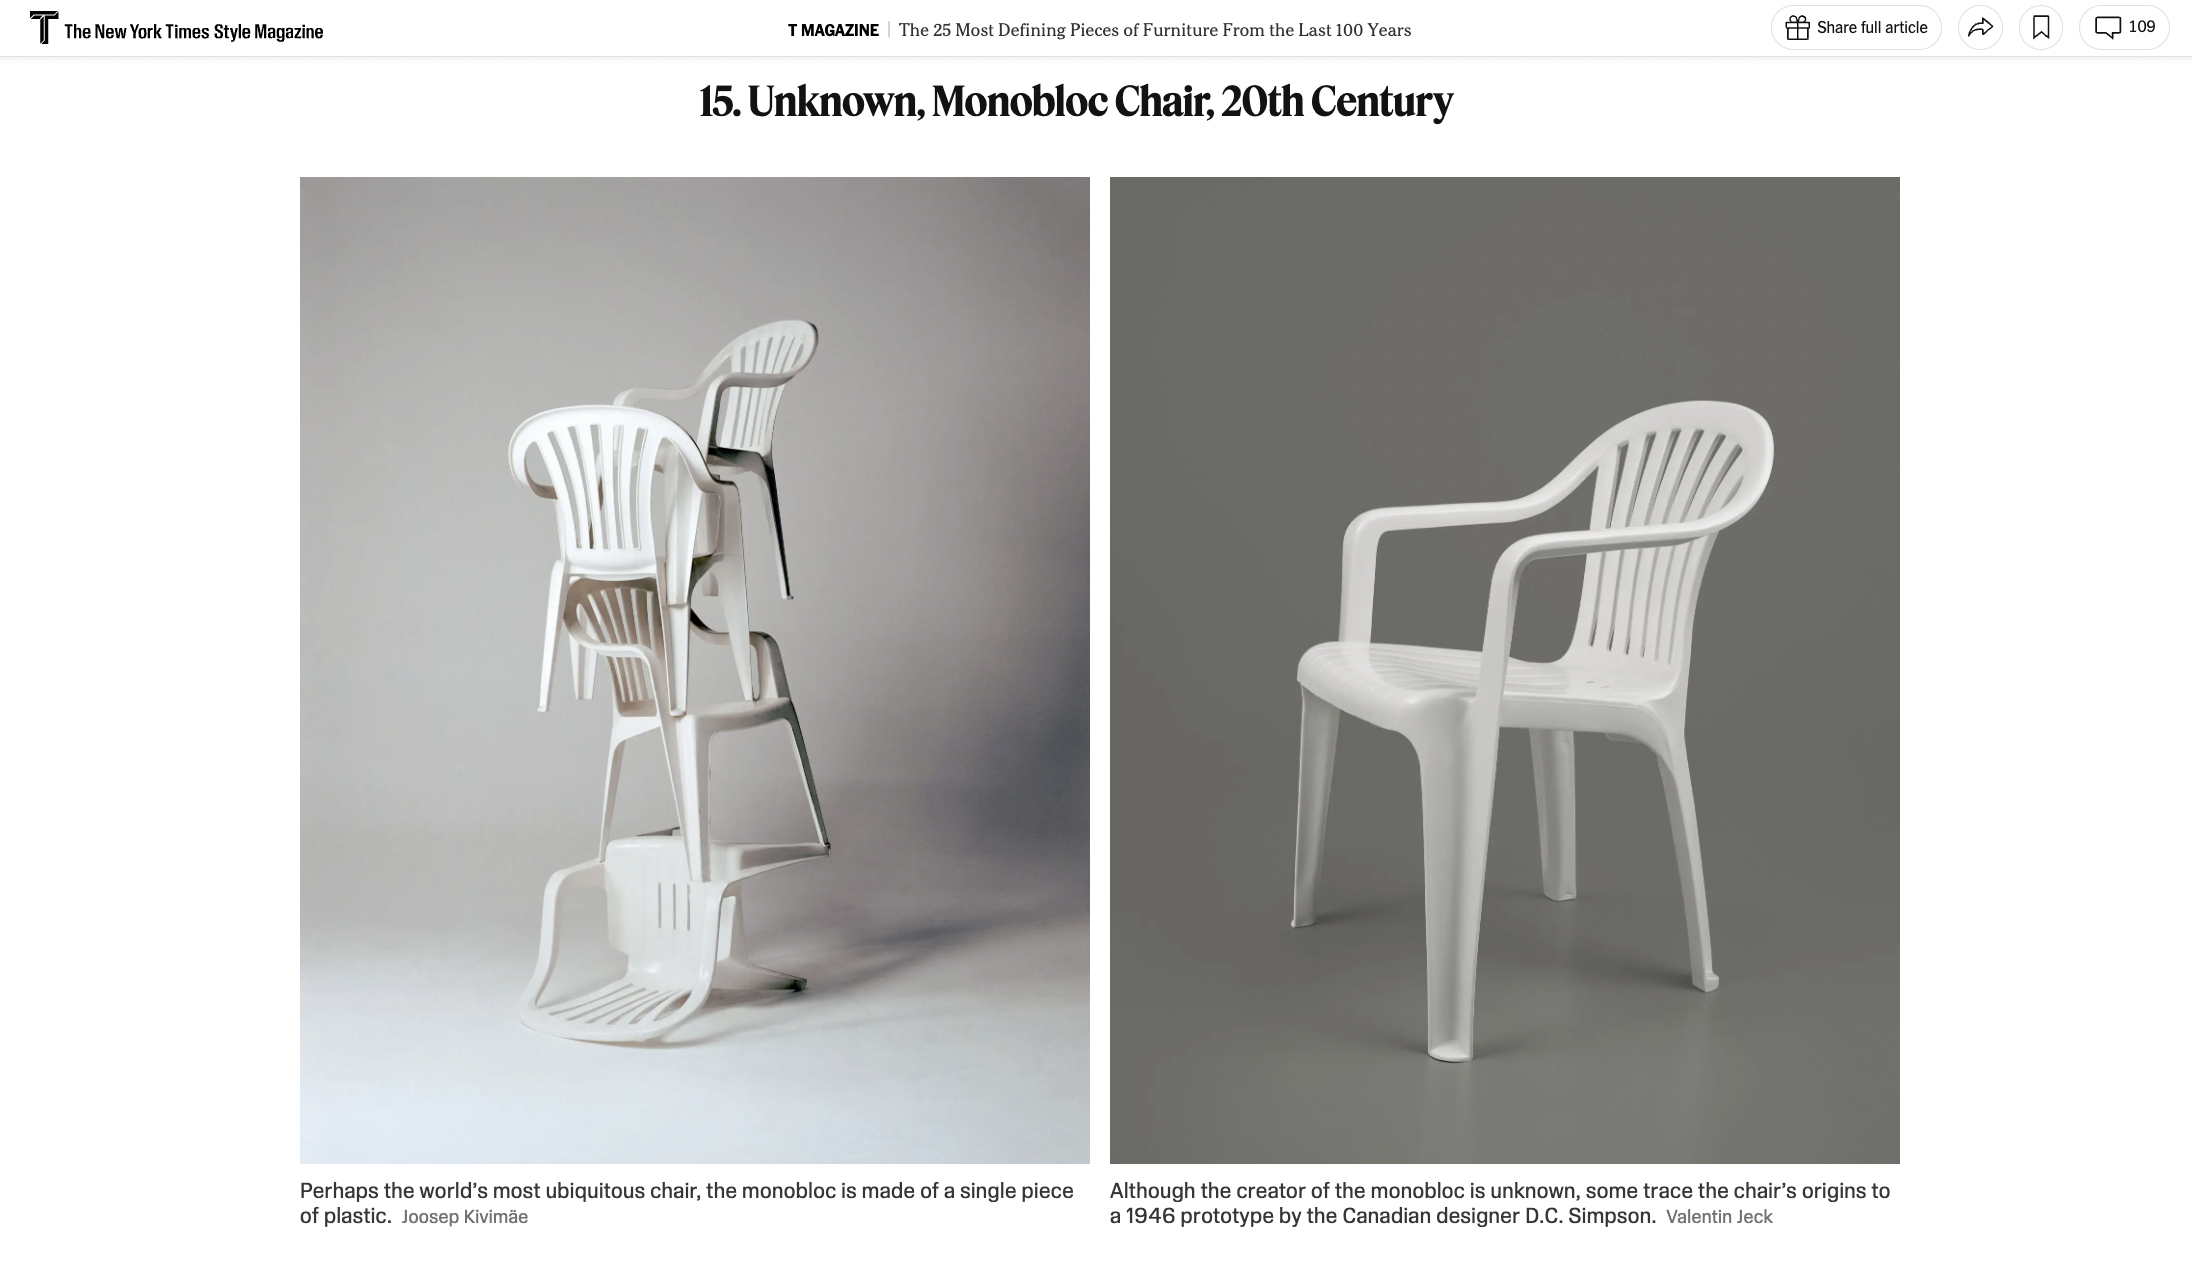 A screenshot shows monobloc chairs featured in The 25 Most Defining Pieces of Furniture From the Last 100 Years list by The New York Times Style Magazine.